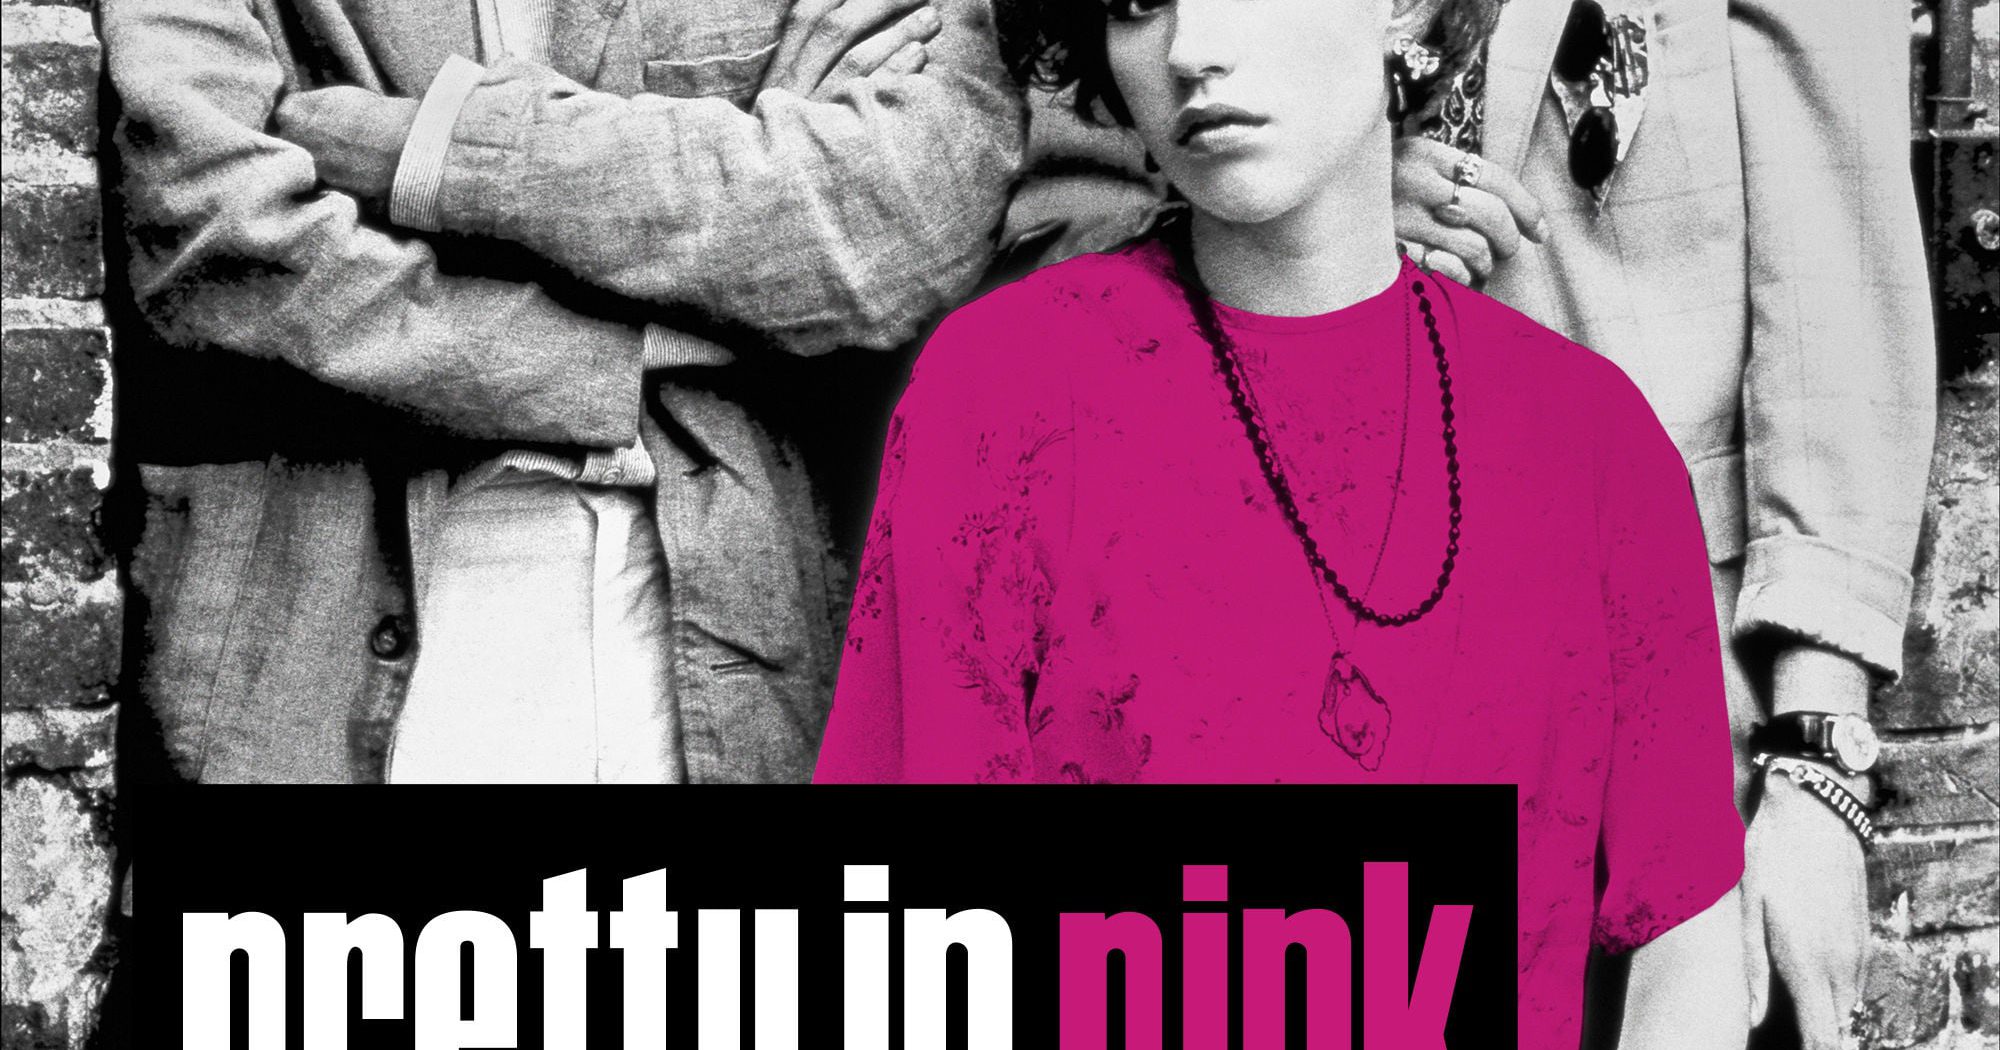 Poster for the movie "Pretty in Pink"